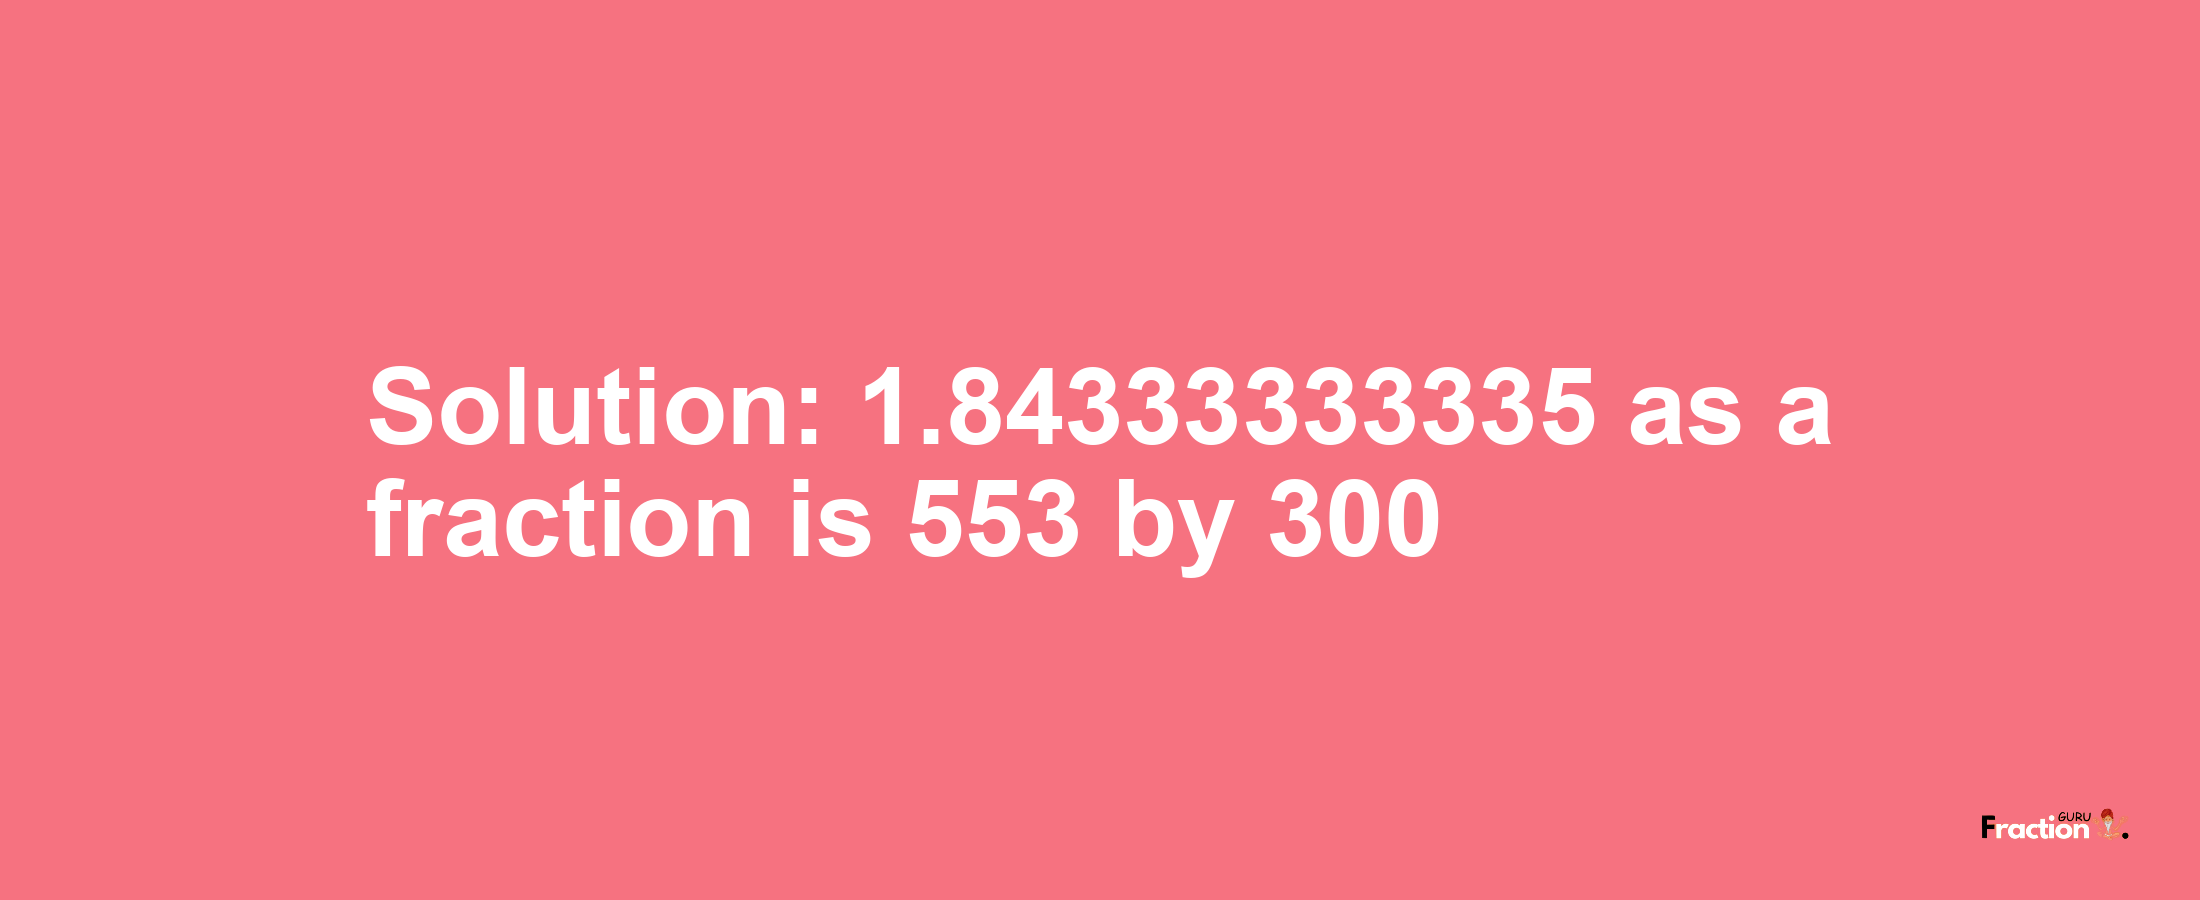 Solution:1.84333333335 as a fraction is 553/300